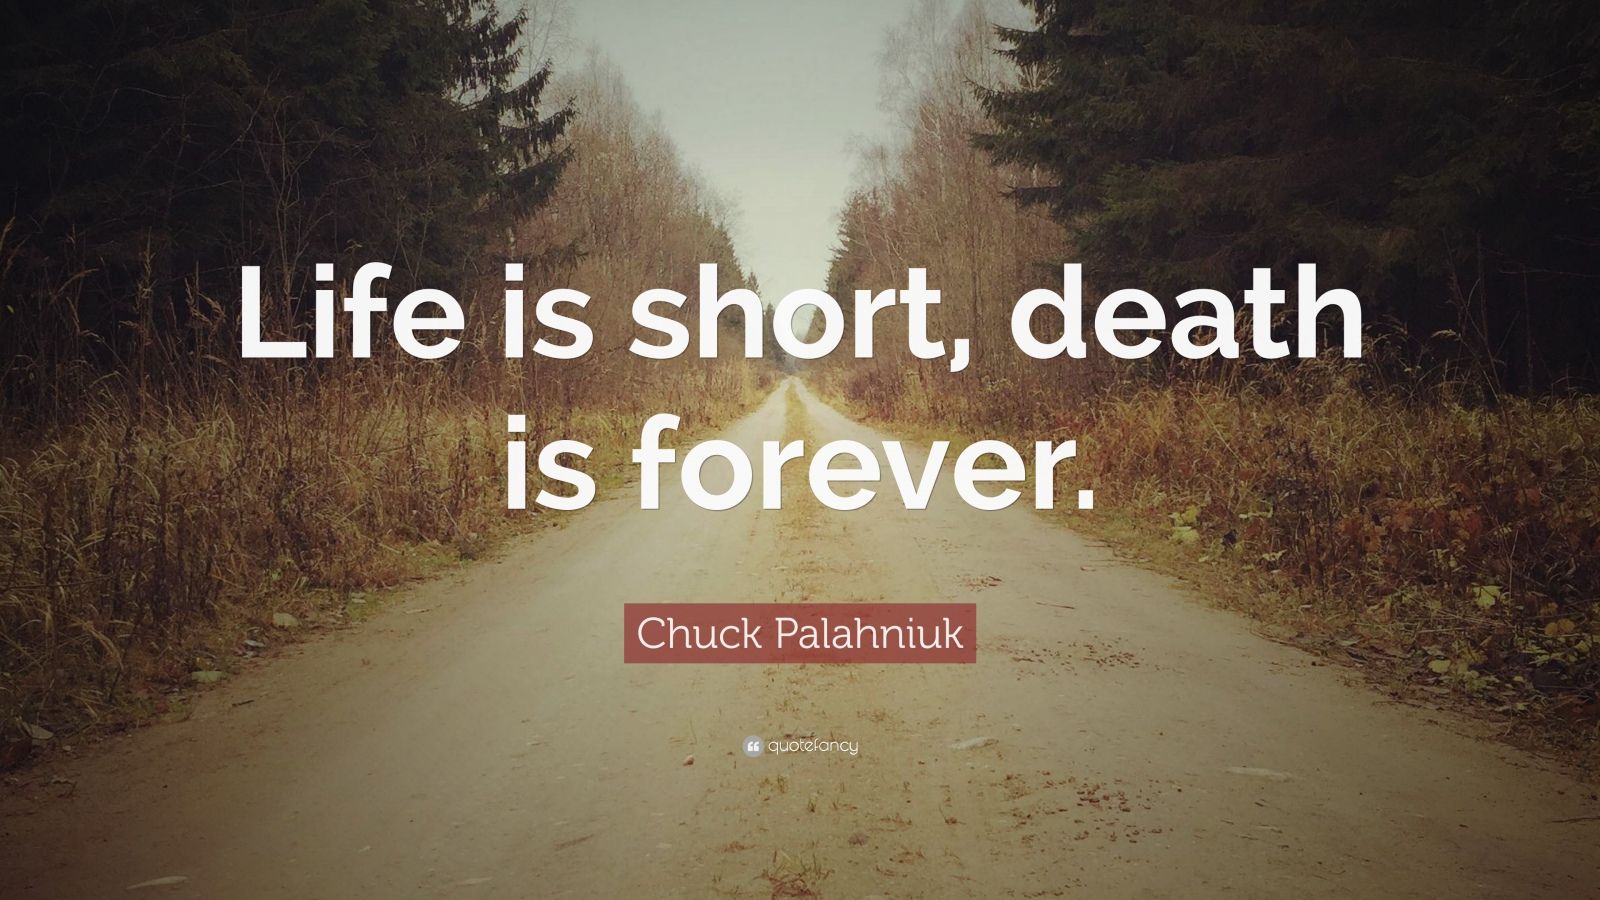 Chuck Palahniuk Quote “Life is short, death is forever